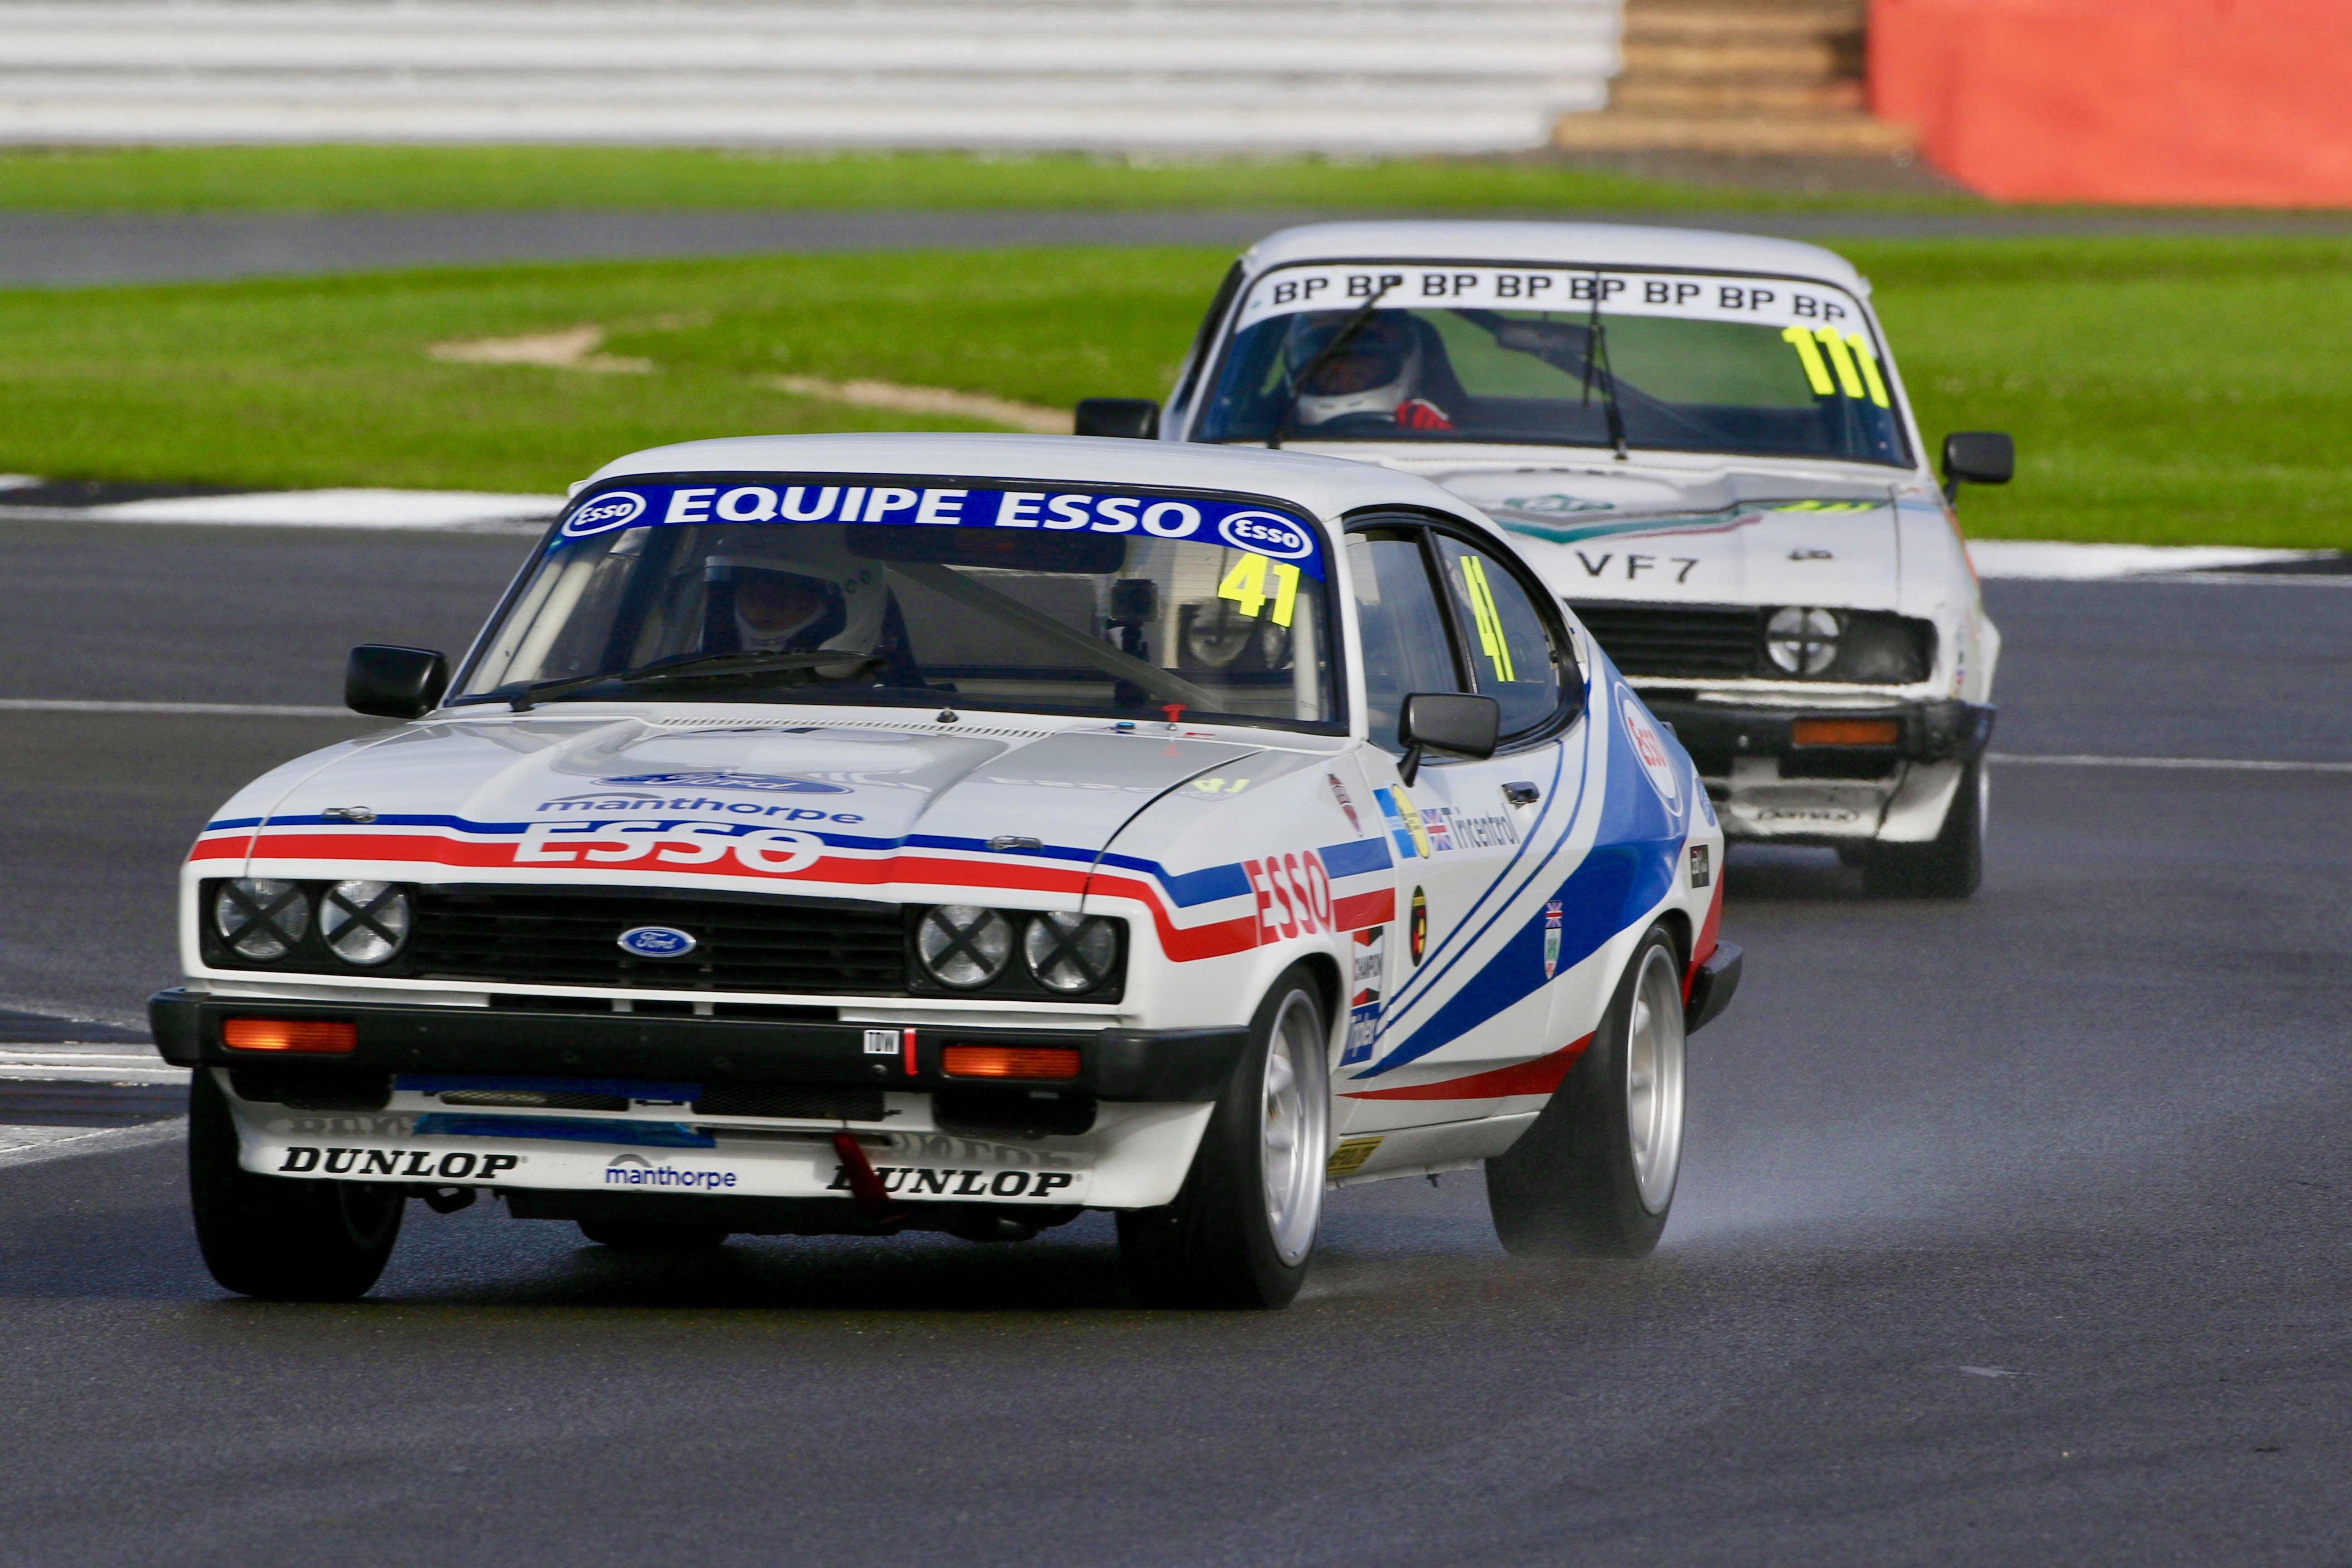 Ford Capris at Silverstone Classic